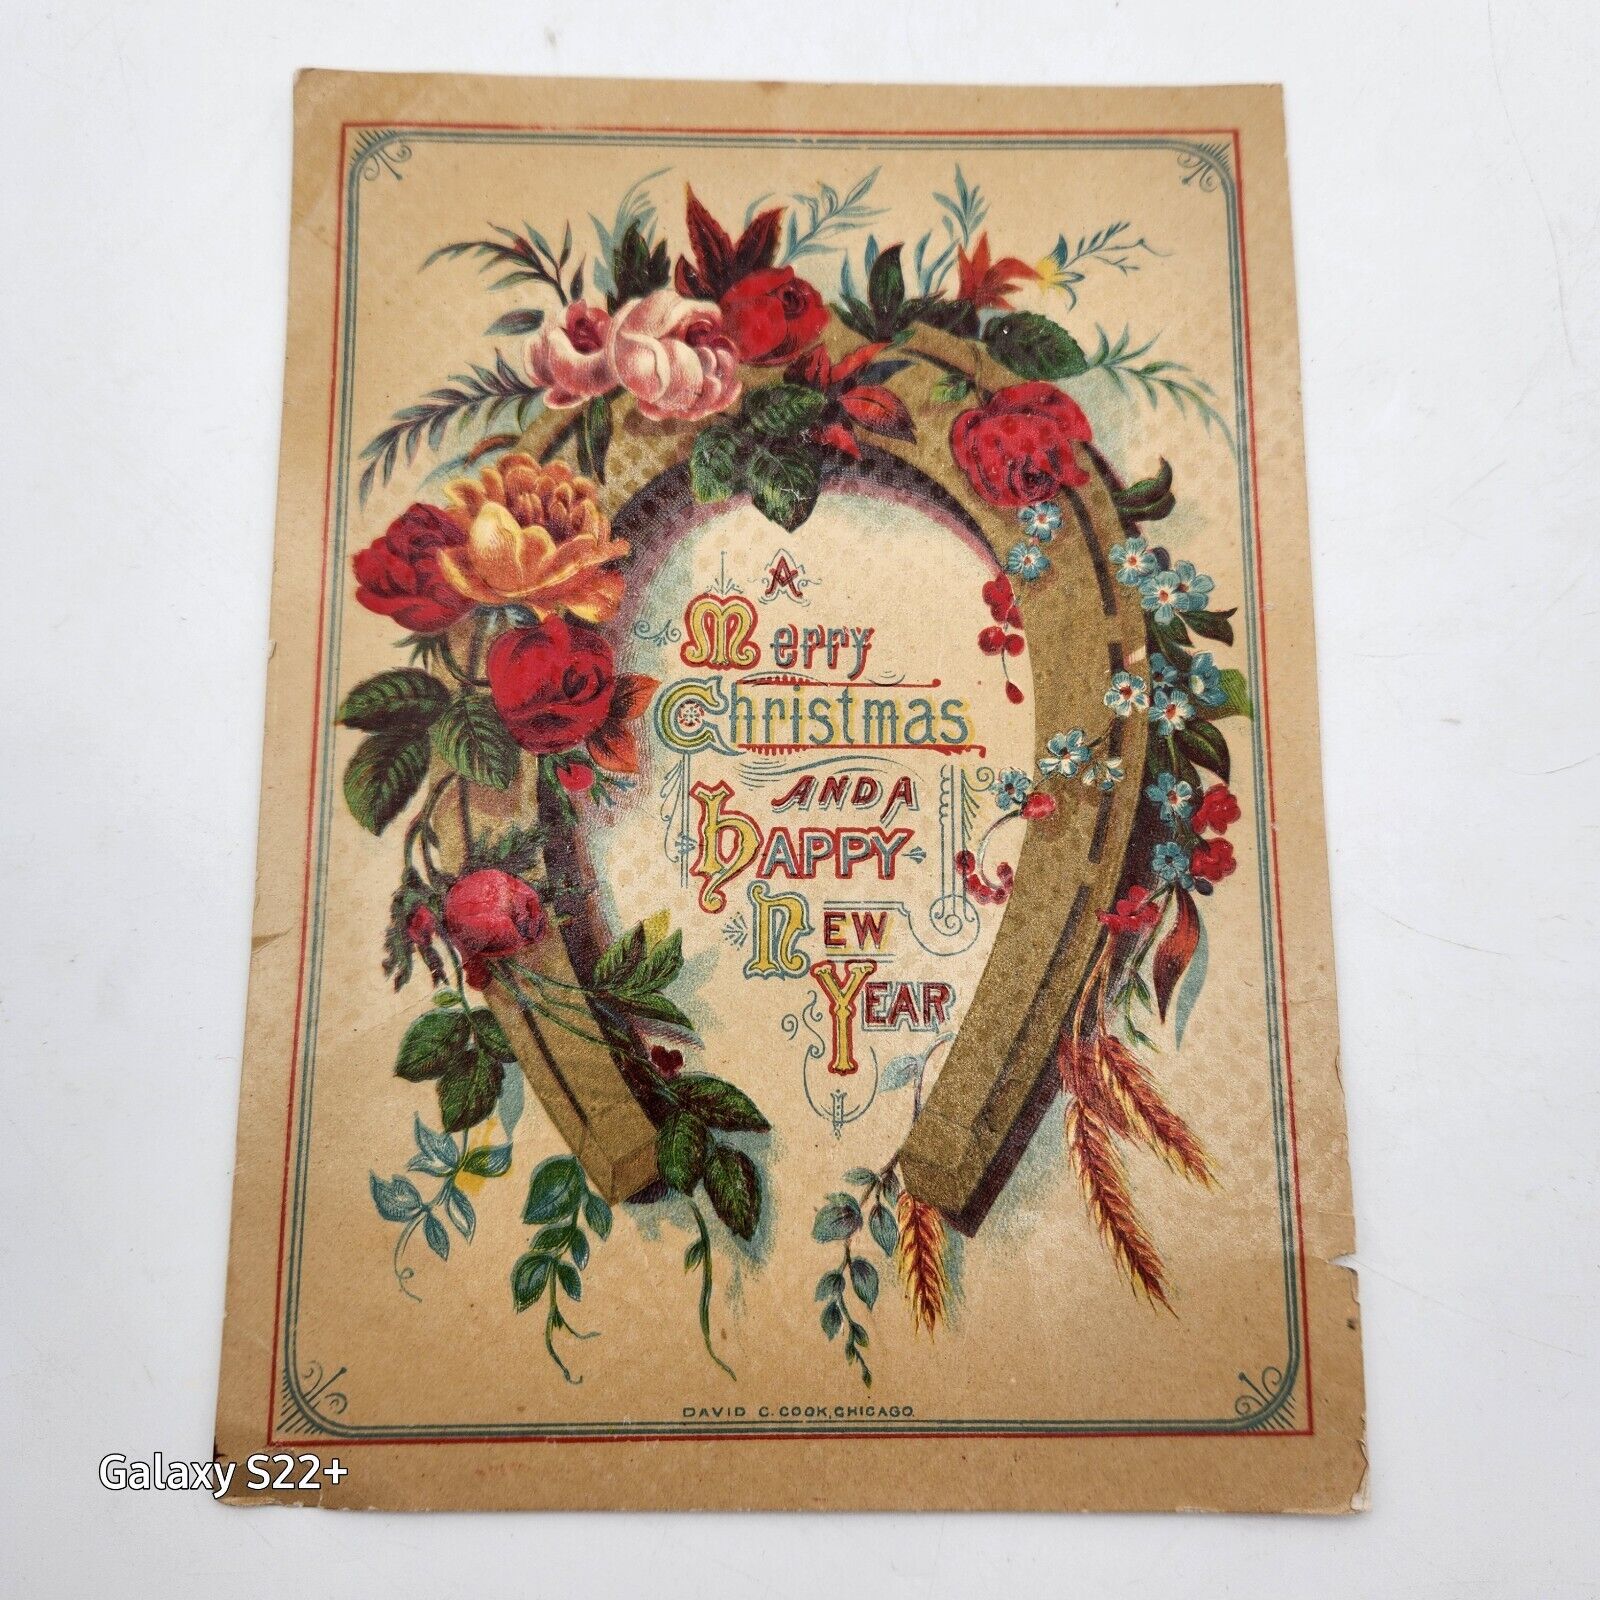 Antique 1980's David C. Cook Chicago IL Victorian Trade Card Merry Christmas